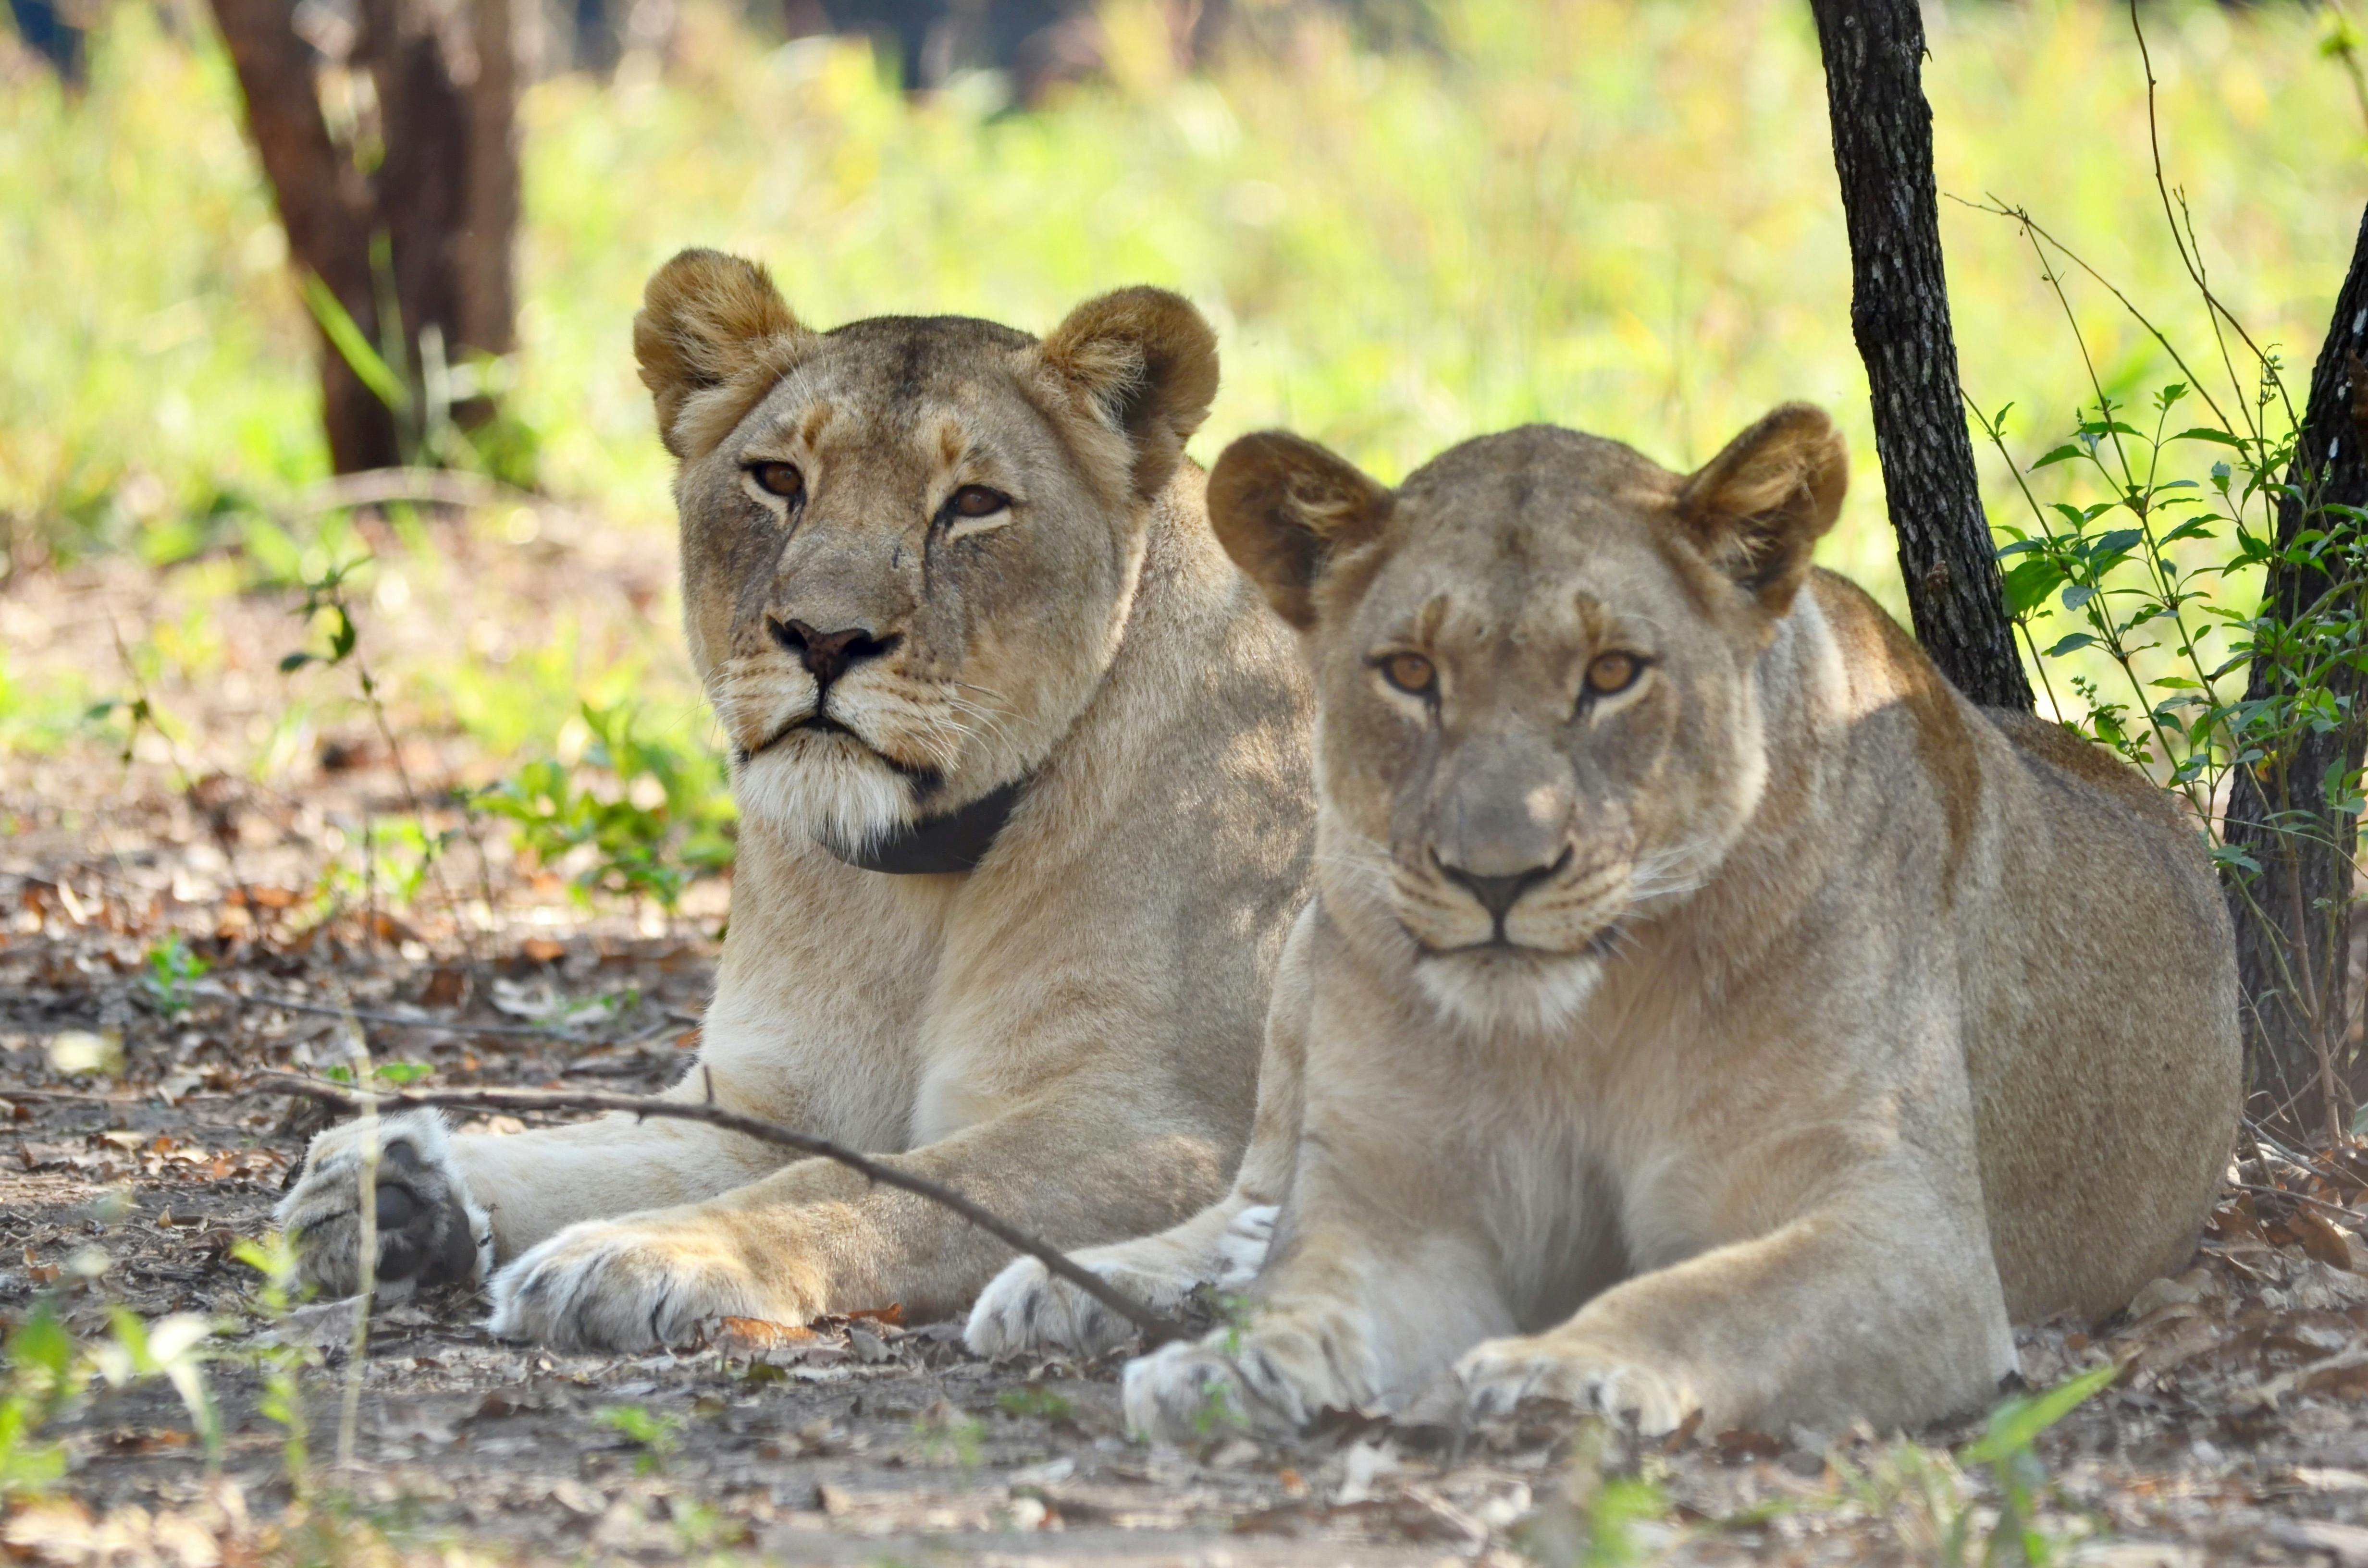 Emergency funding for lion conservation